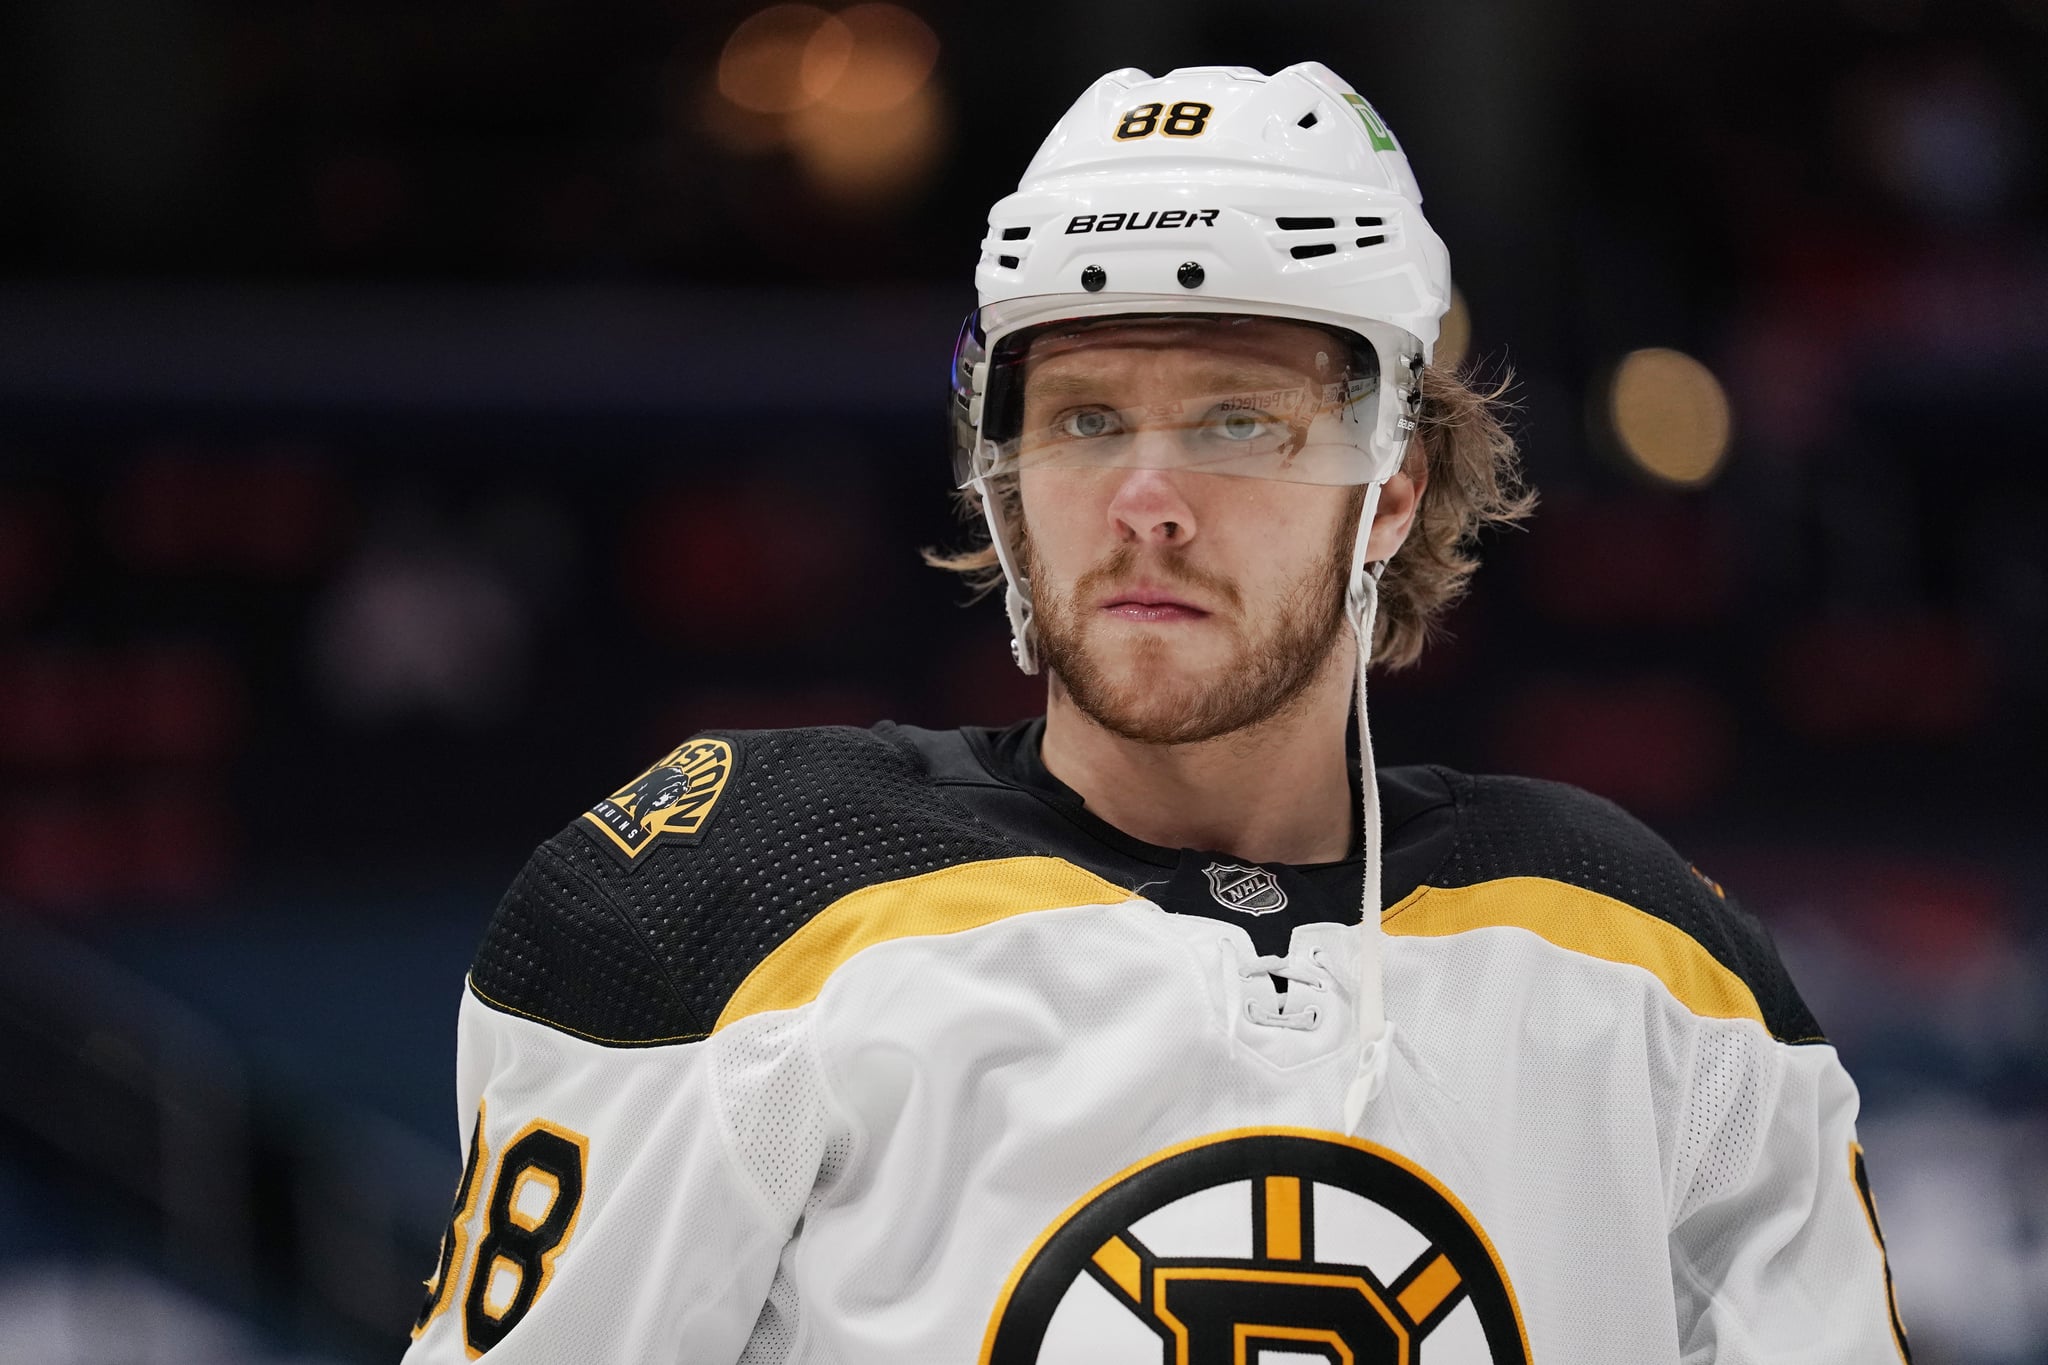 WASHINGTON, DC - MAY 17: David Pastrnak #88 of the Boston Bruins warms up before playing against the Washington Capitals in Game Two of the First Round of the 2021 Stanley Cup Playoffs at Capital One Arena on May 17, 2021 in Washington, DC. (Photo by Patrick McDermott/NHLI via Getty Images)